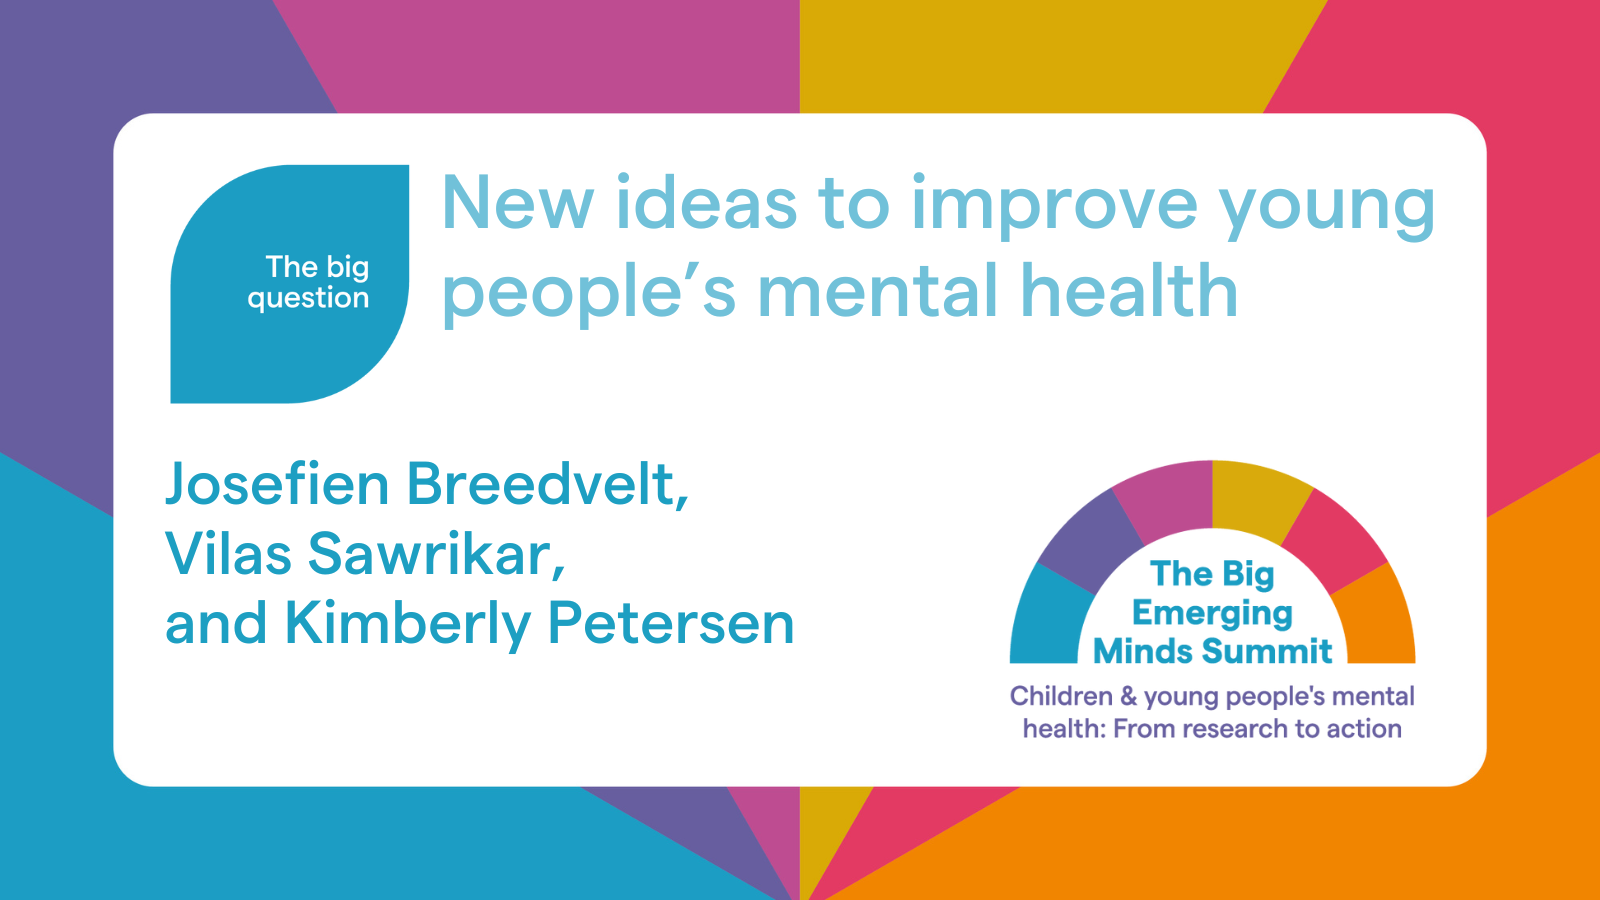 New ideas to improve young people's mental health